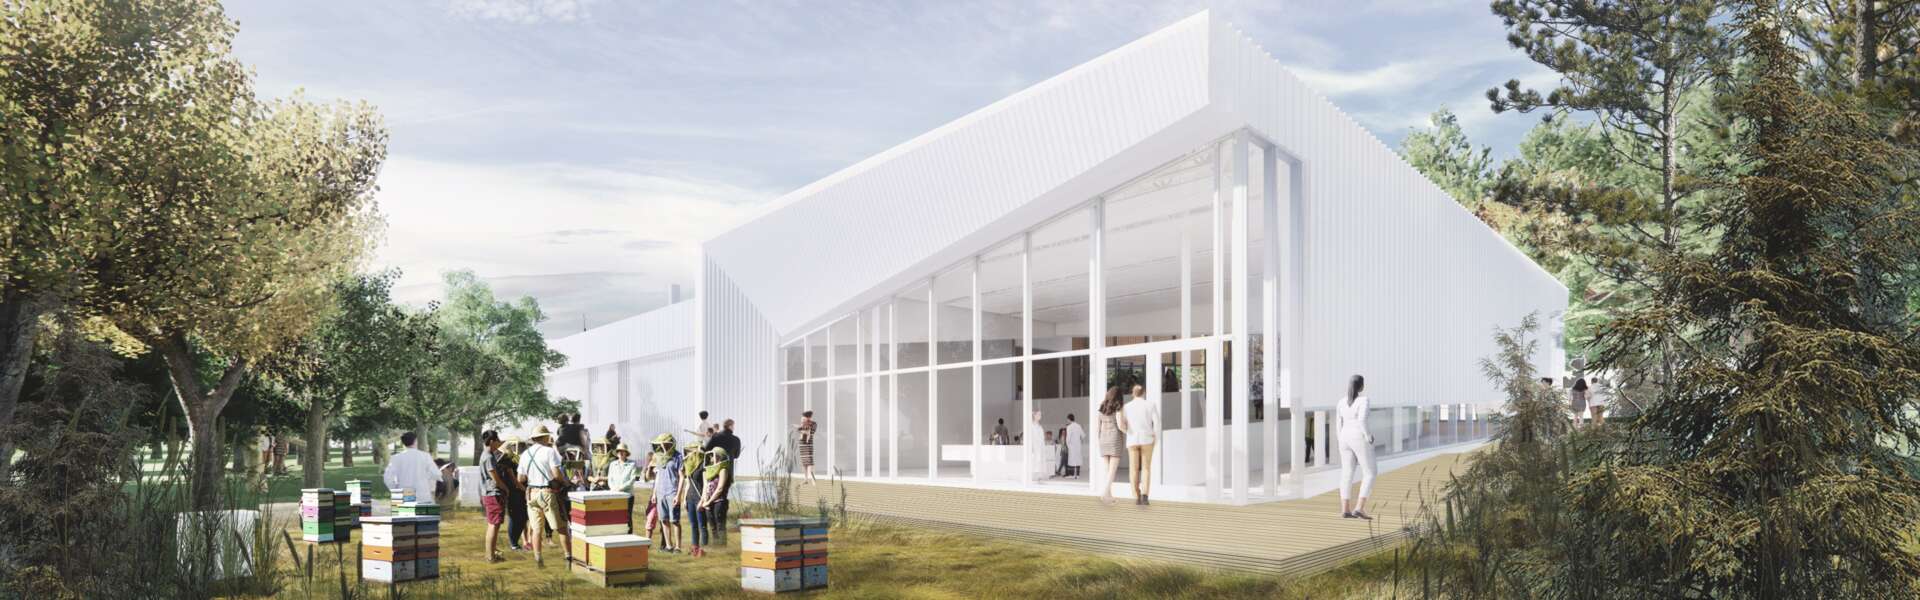 An artist's rendering of the new Honey Bee Research Centre shows a large white, glass-filled building with fruit trees and apiary boxes outside